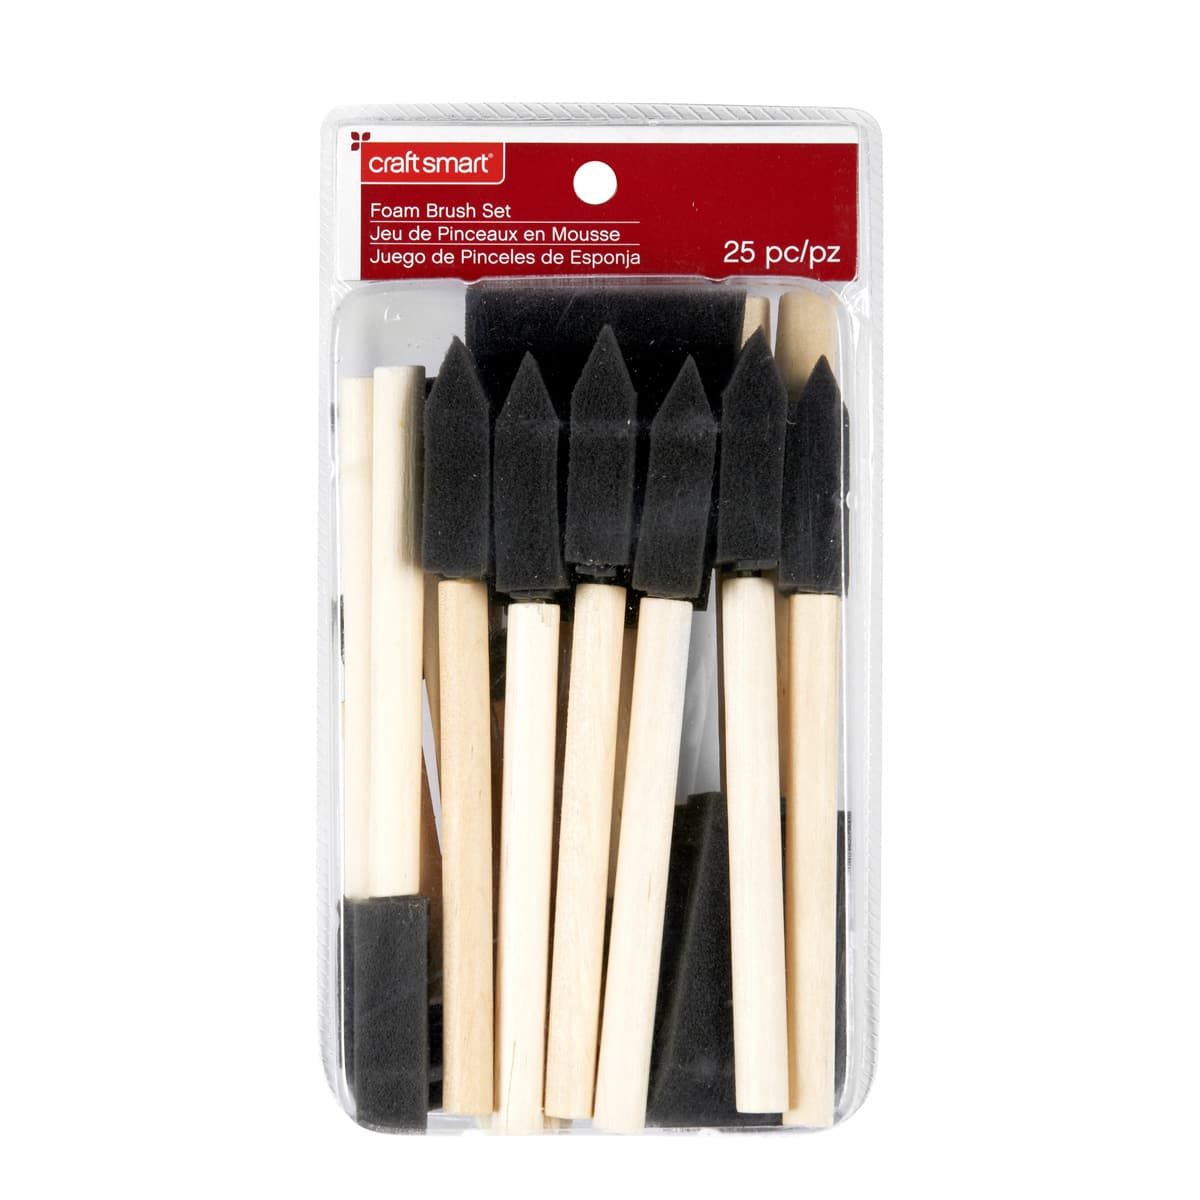 Top Notch 1 Foam Brushes 20pk - Craft Paint Brushes - Art Supplies & Painting